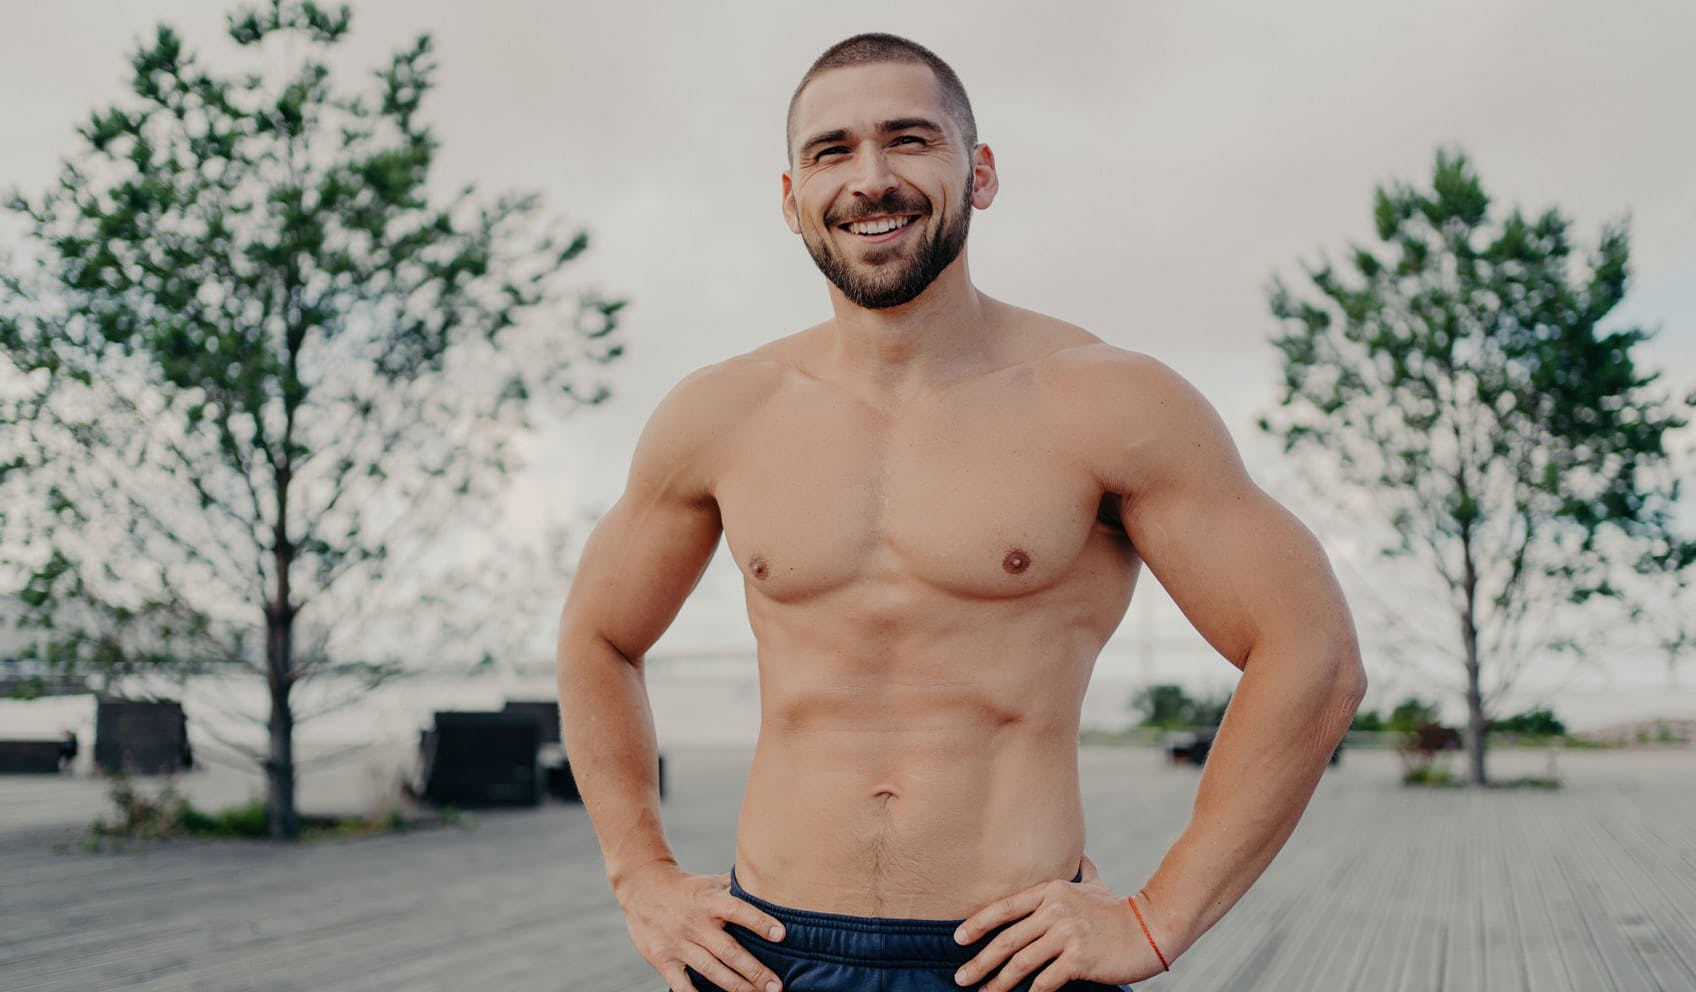 athletic man standing by trees with shirt off